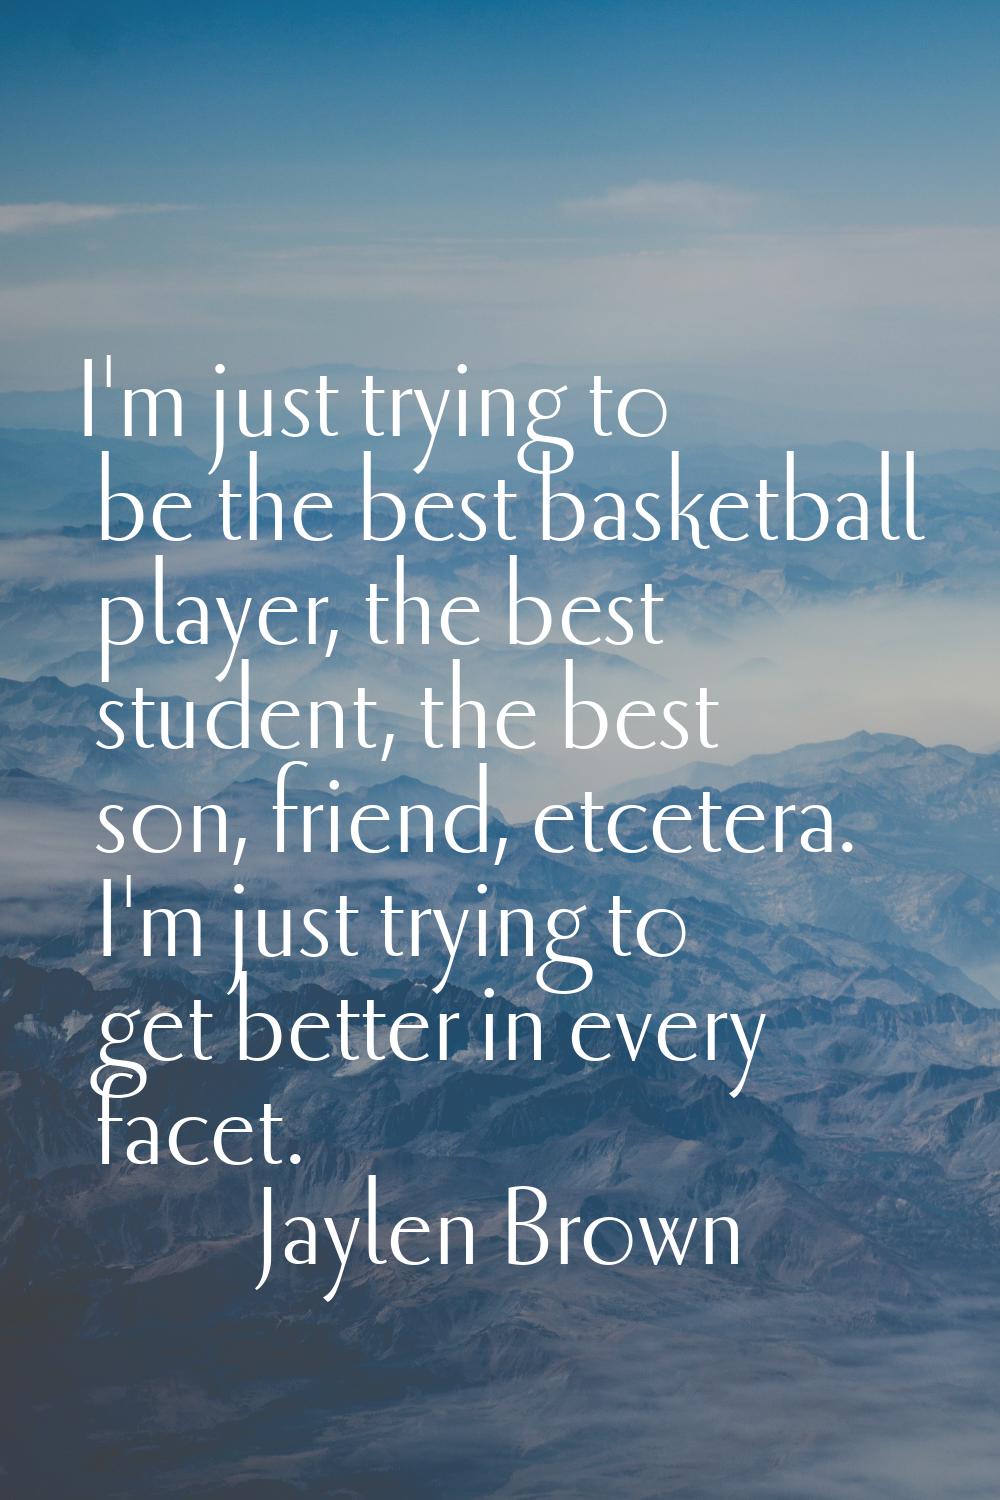 I'm just trying to be the best basketball player, the best student, the best son, friend, etcetera.